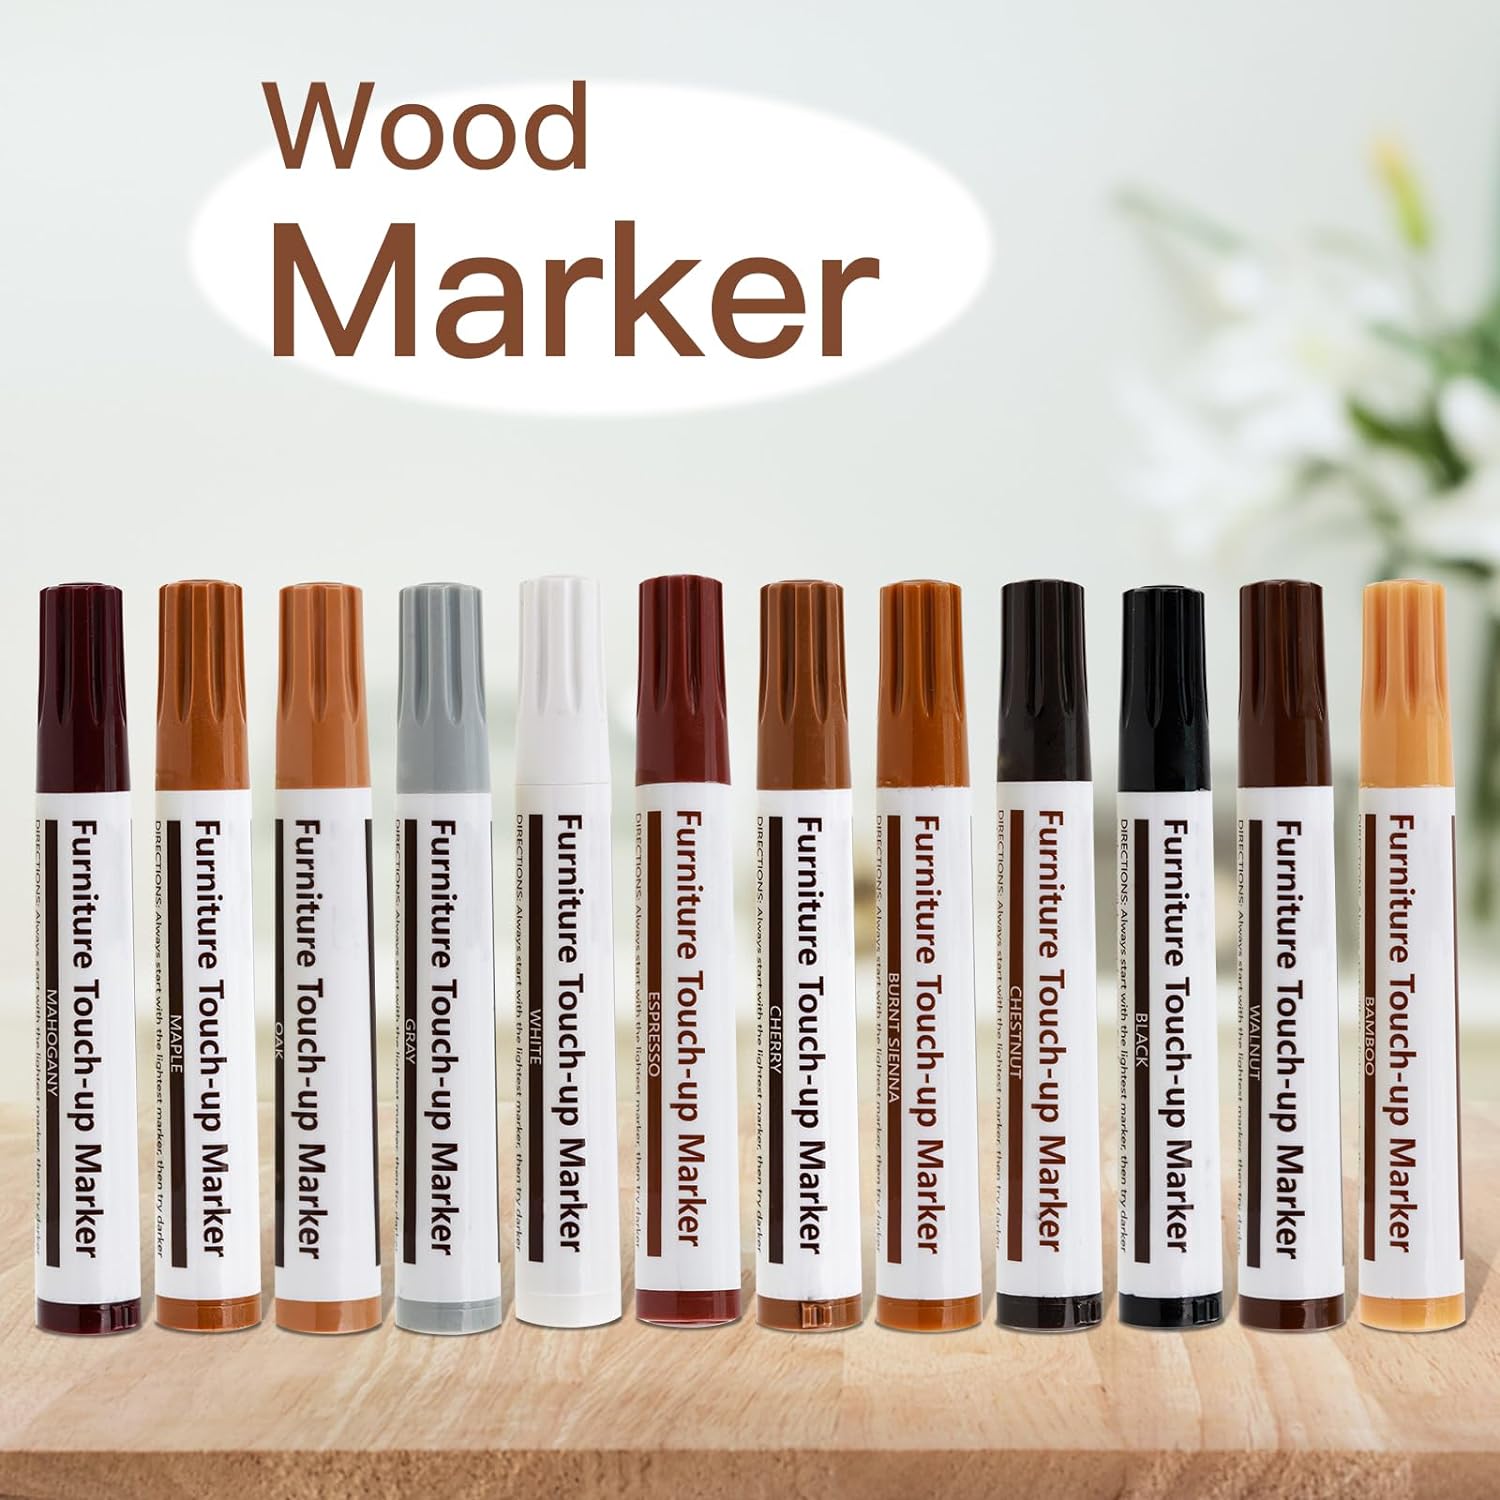 New Upgrade Furniture Pens for Touch Up, 12 Colors Wood Scratch Repair Markers, Professional Repair Tools for Stains, Scratches, Wood Floors, Tables, Bedposts : Health & Household